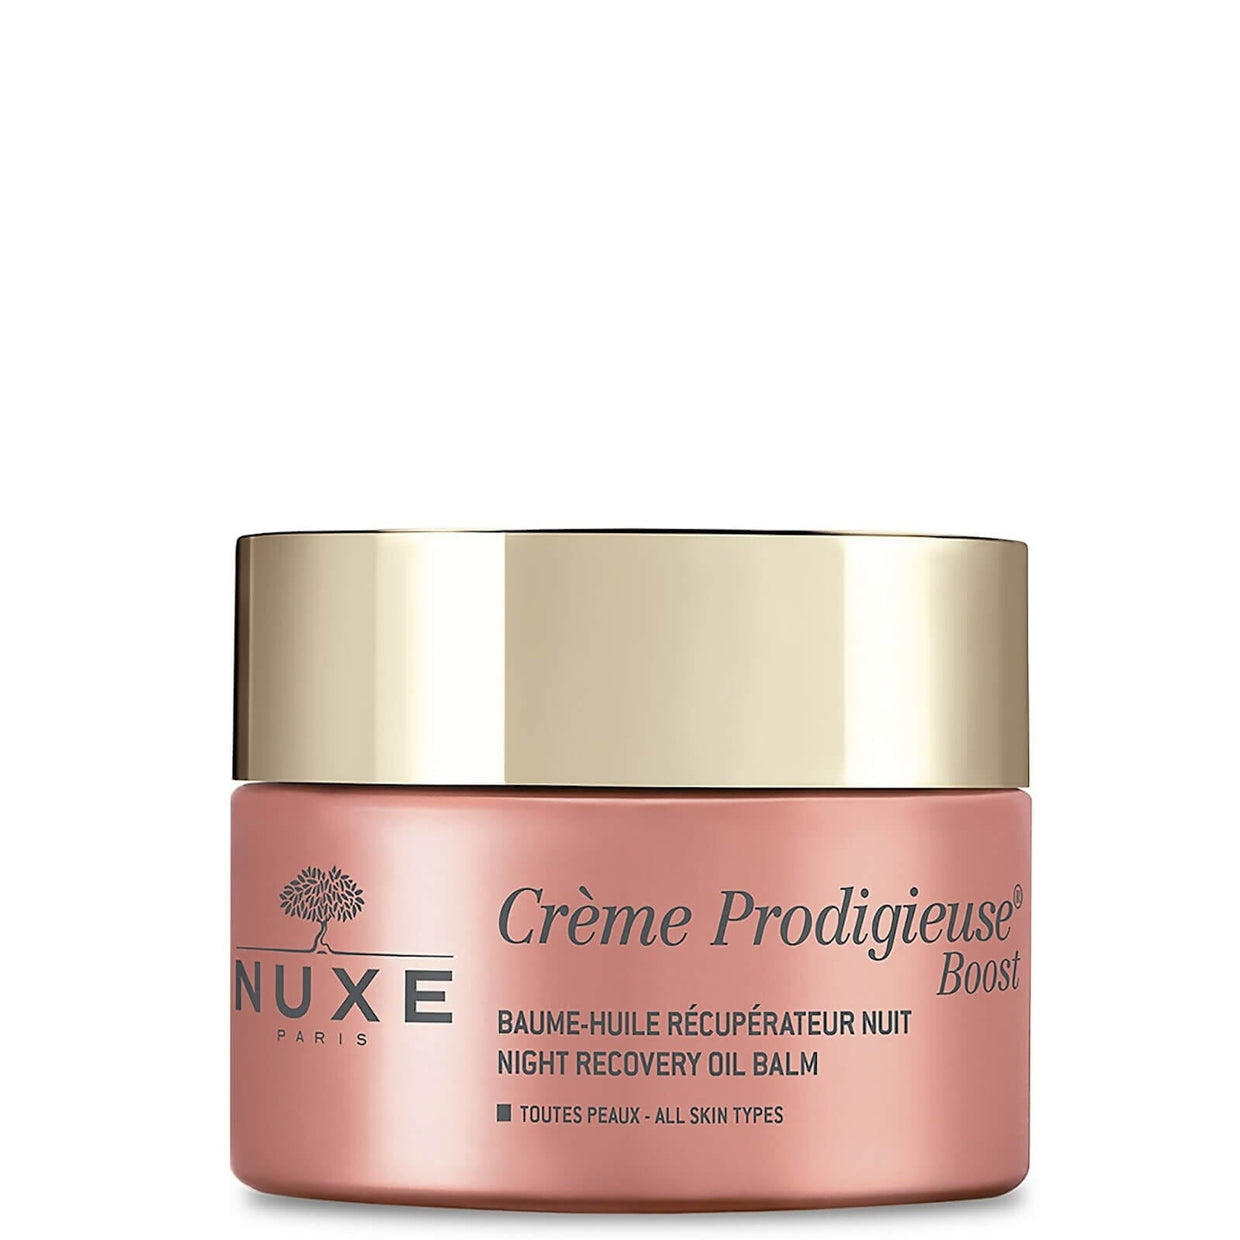 Nuxe Creme Prodigieuse Boost Night Recovery Oil Balm Nuxe 50 ml Shop at Exclusive Beauty Club